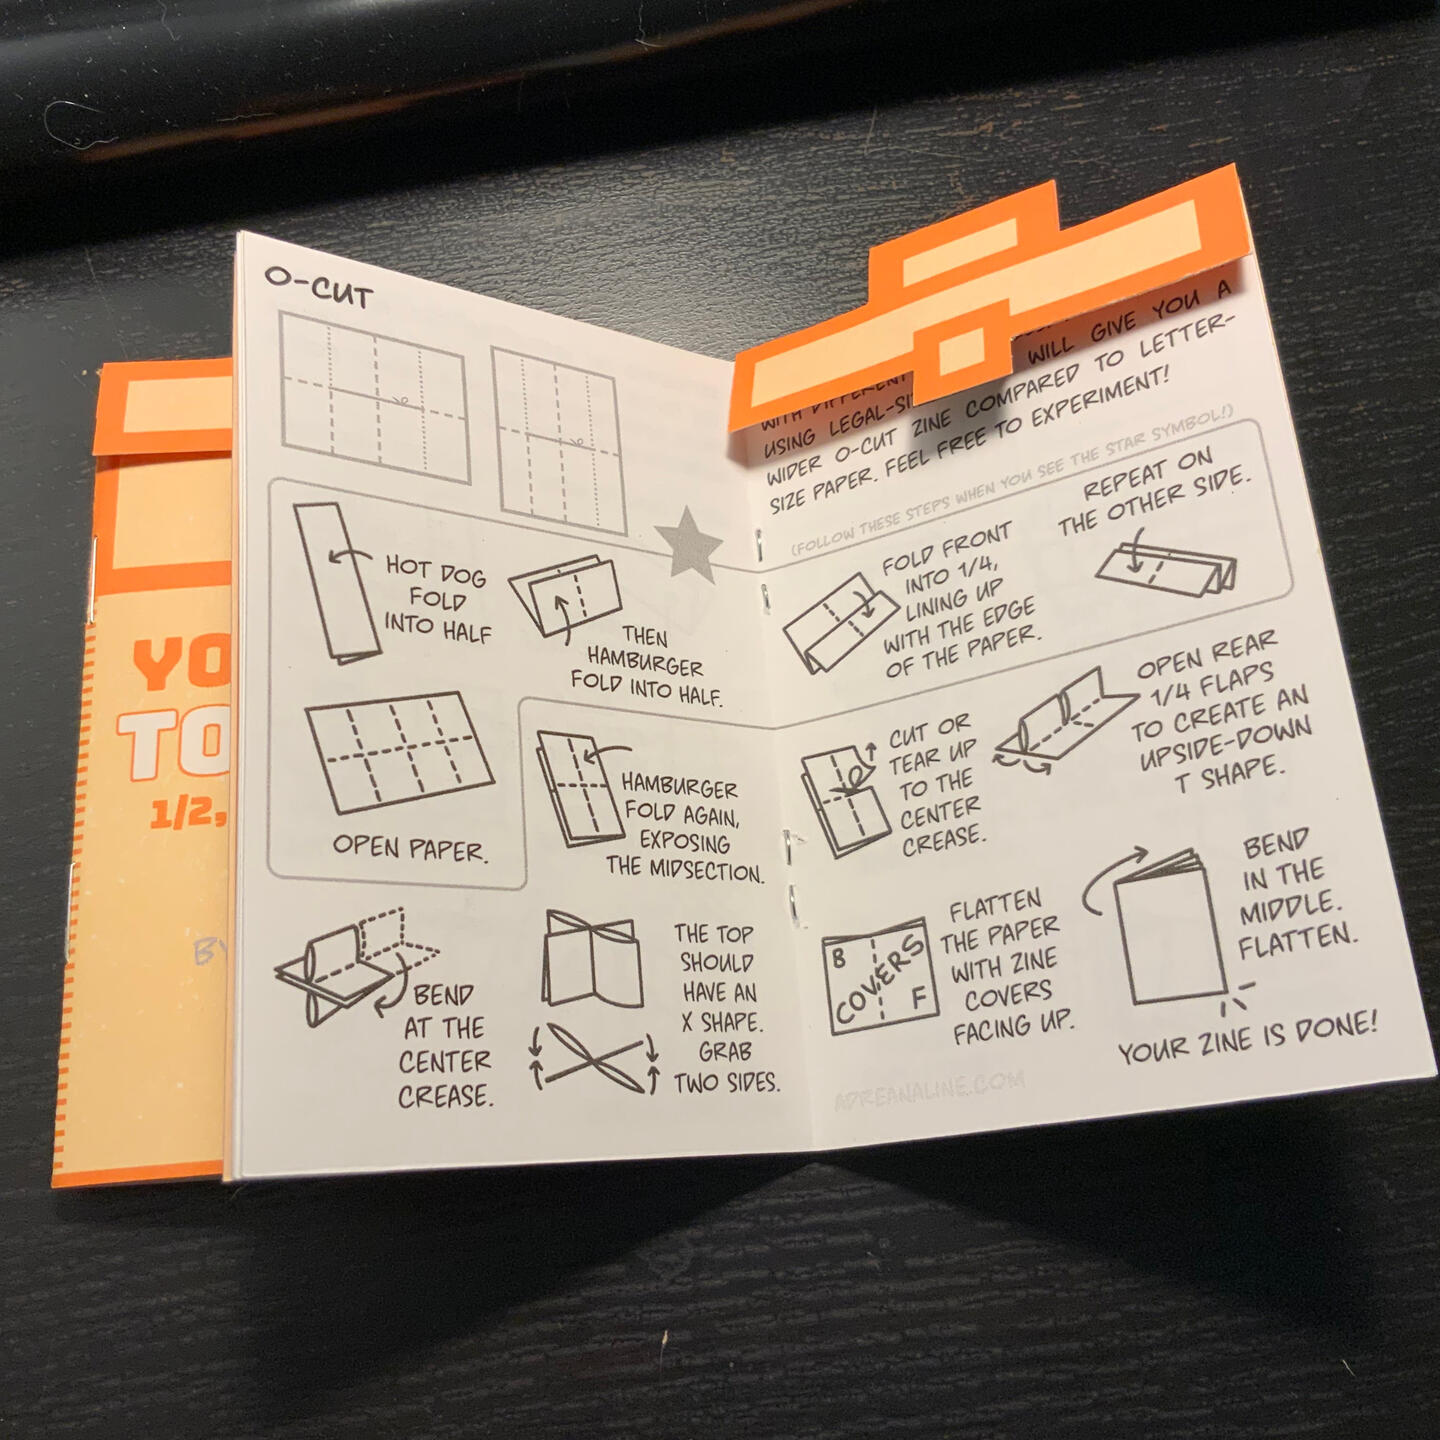 Interior view of Your Zine Toolbox showing instructions on making an O-Cut zine.